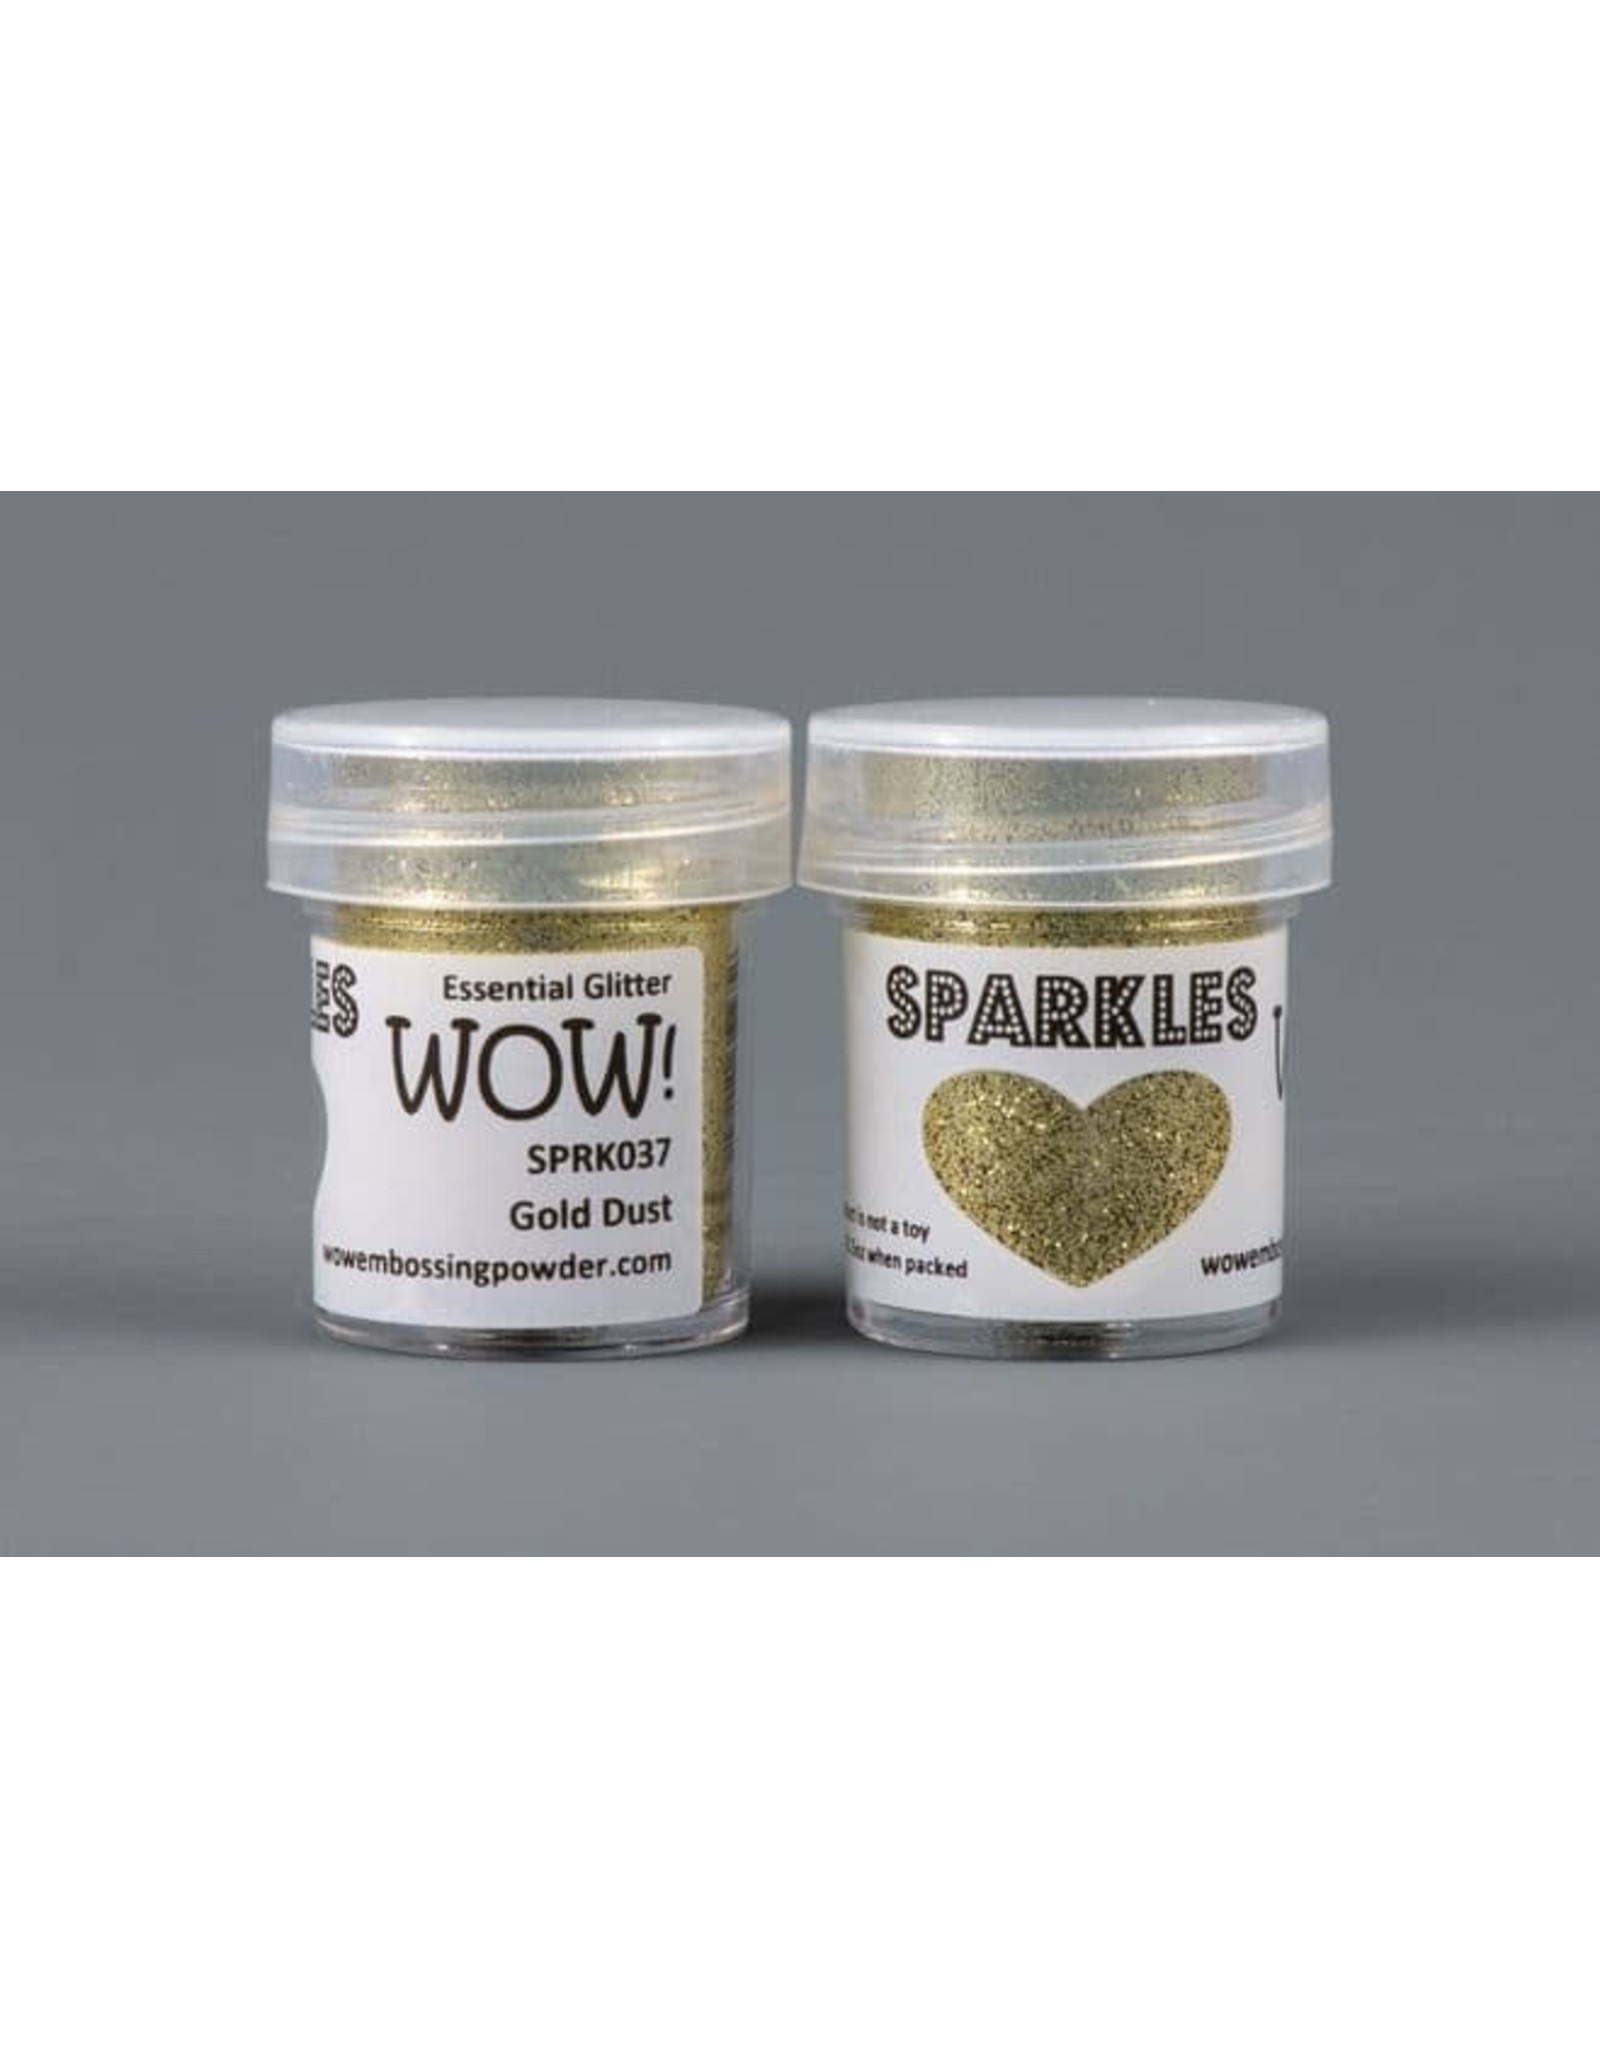 WOW! WOW Sparkles Glitter -  Gold Dust